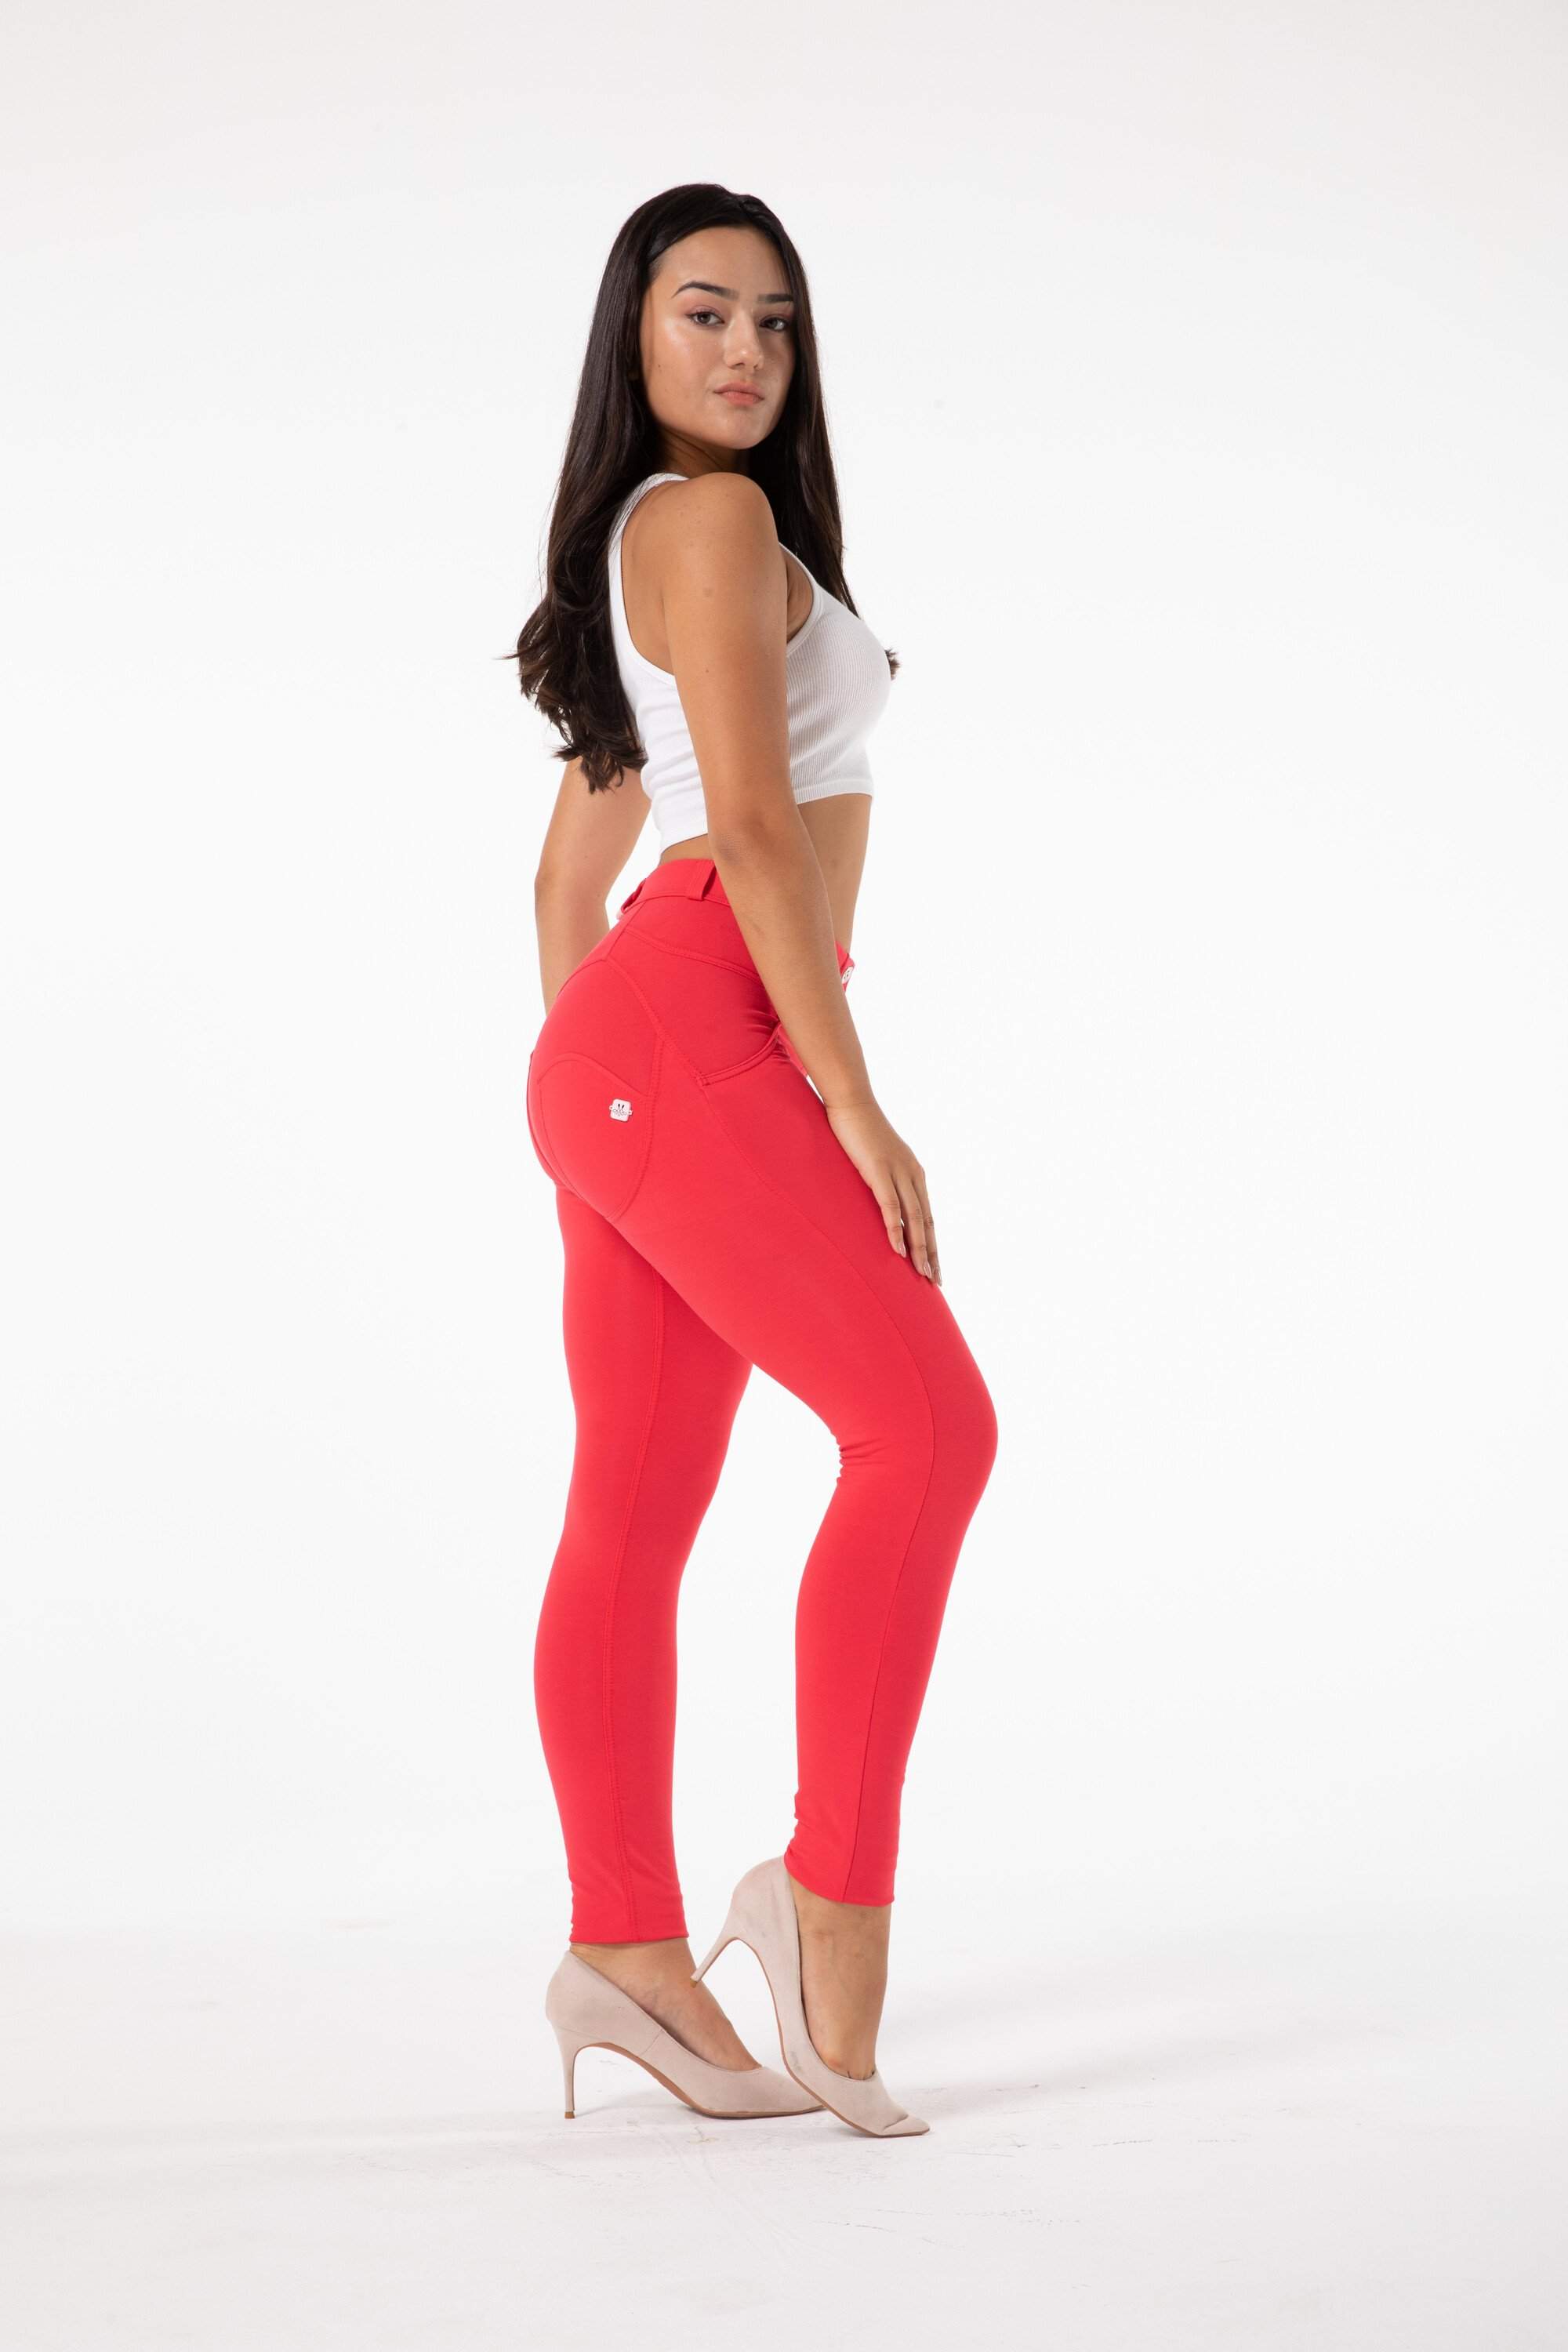 The Audacity Buttoned Watermelon Red Leggings for women